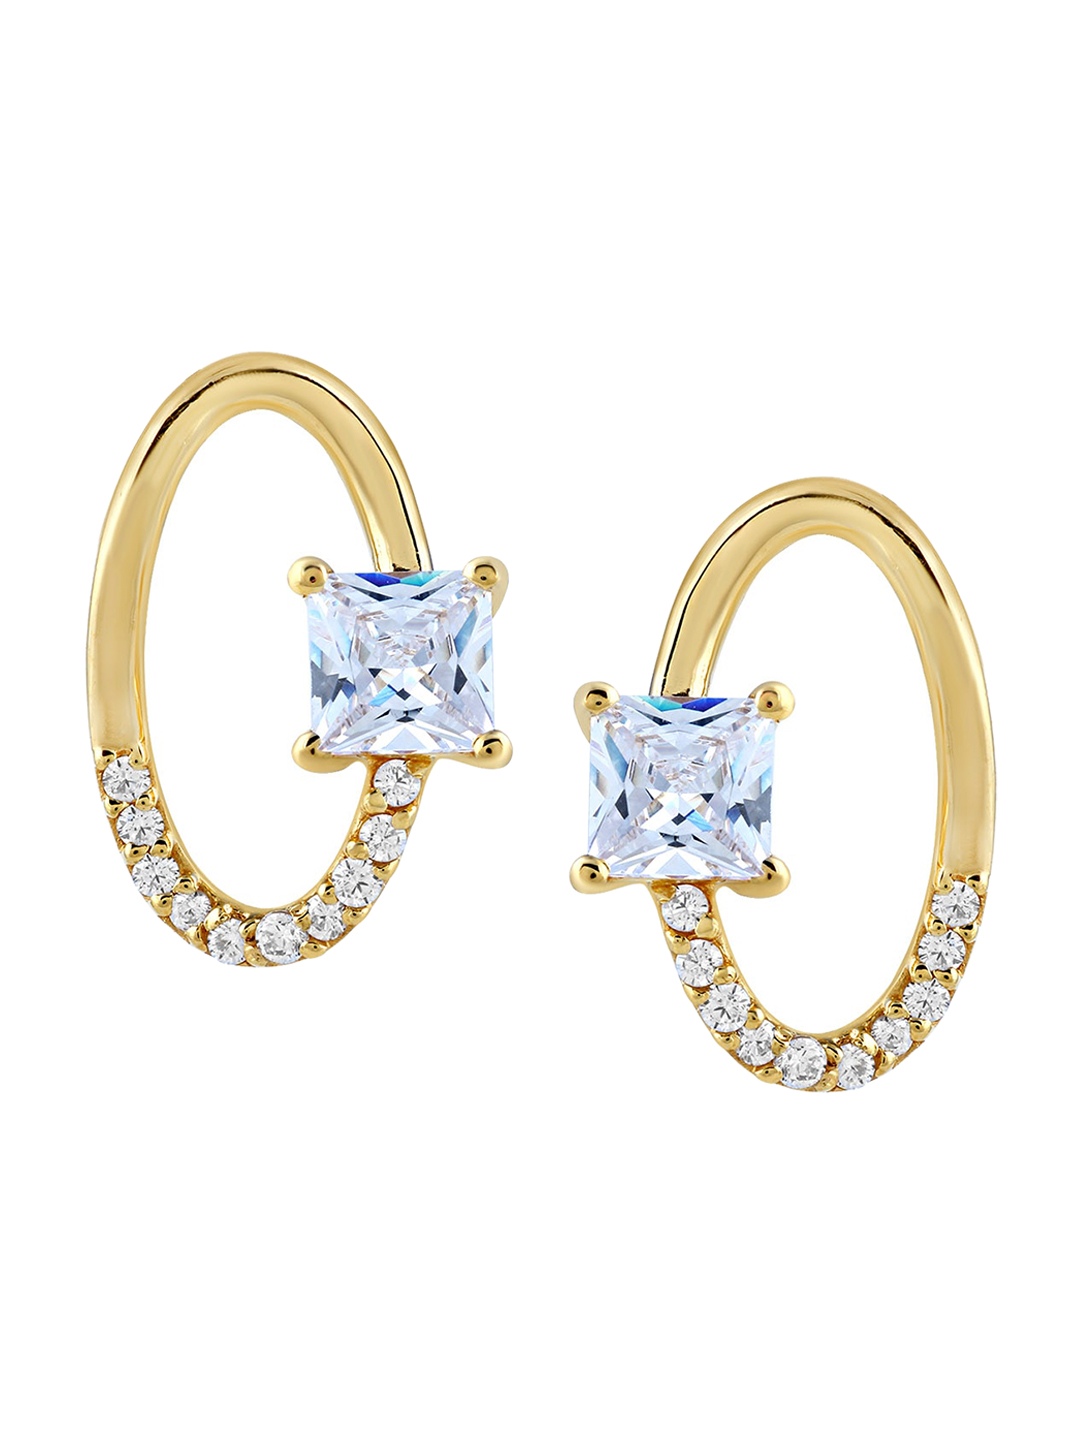 

LA SOULA Gold-Plated & White 925 Sterling Silver Cubic Zirconia Studs Earrings